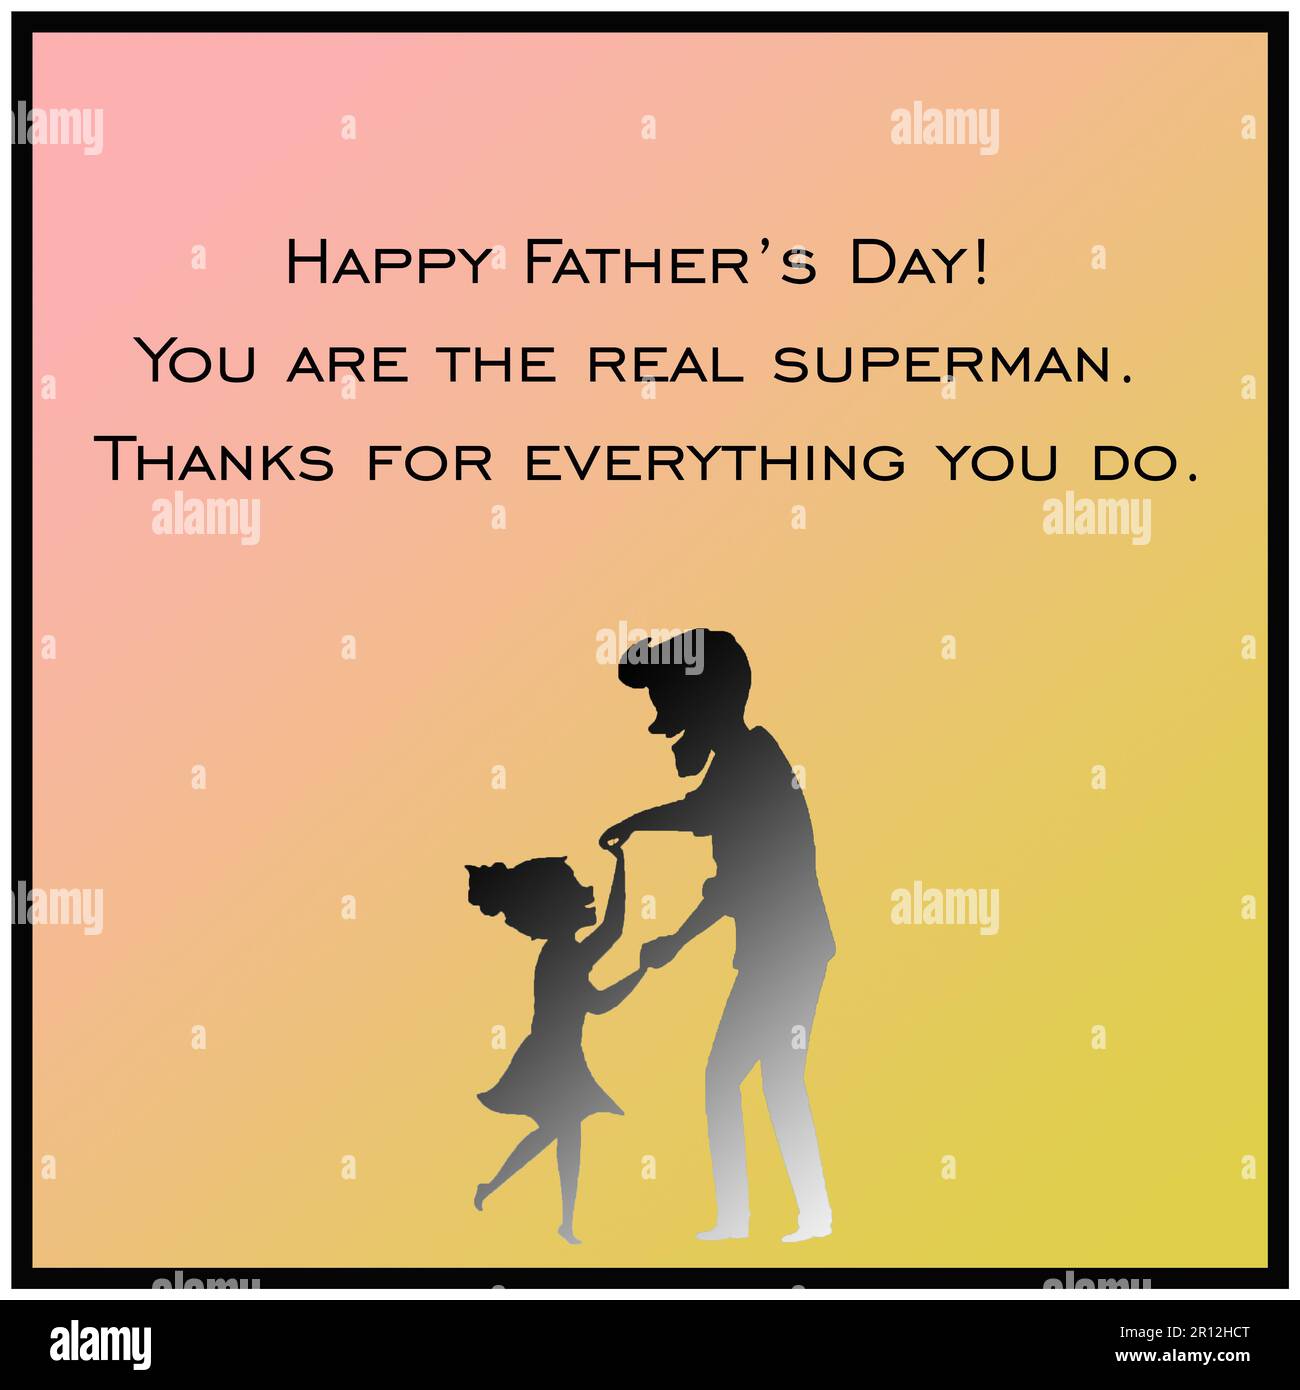 Father's Day Wishes varieties of messages 2023 Stock Photo - Alamy